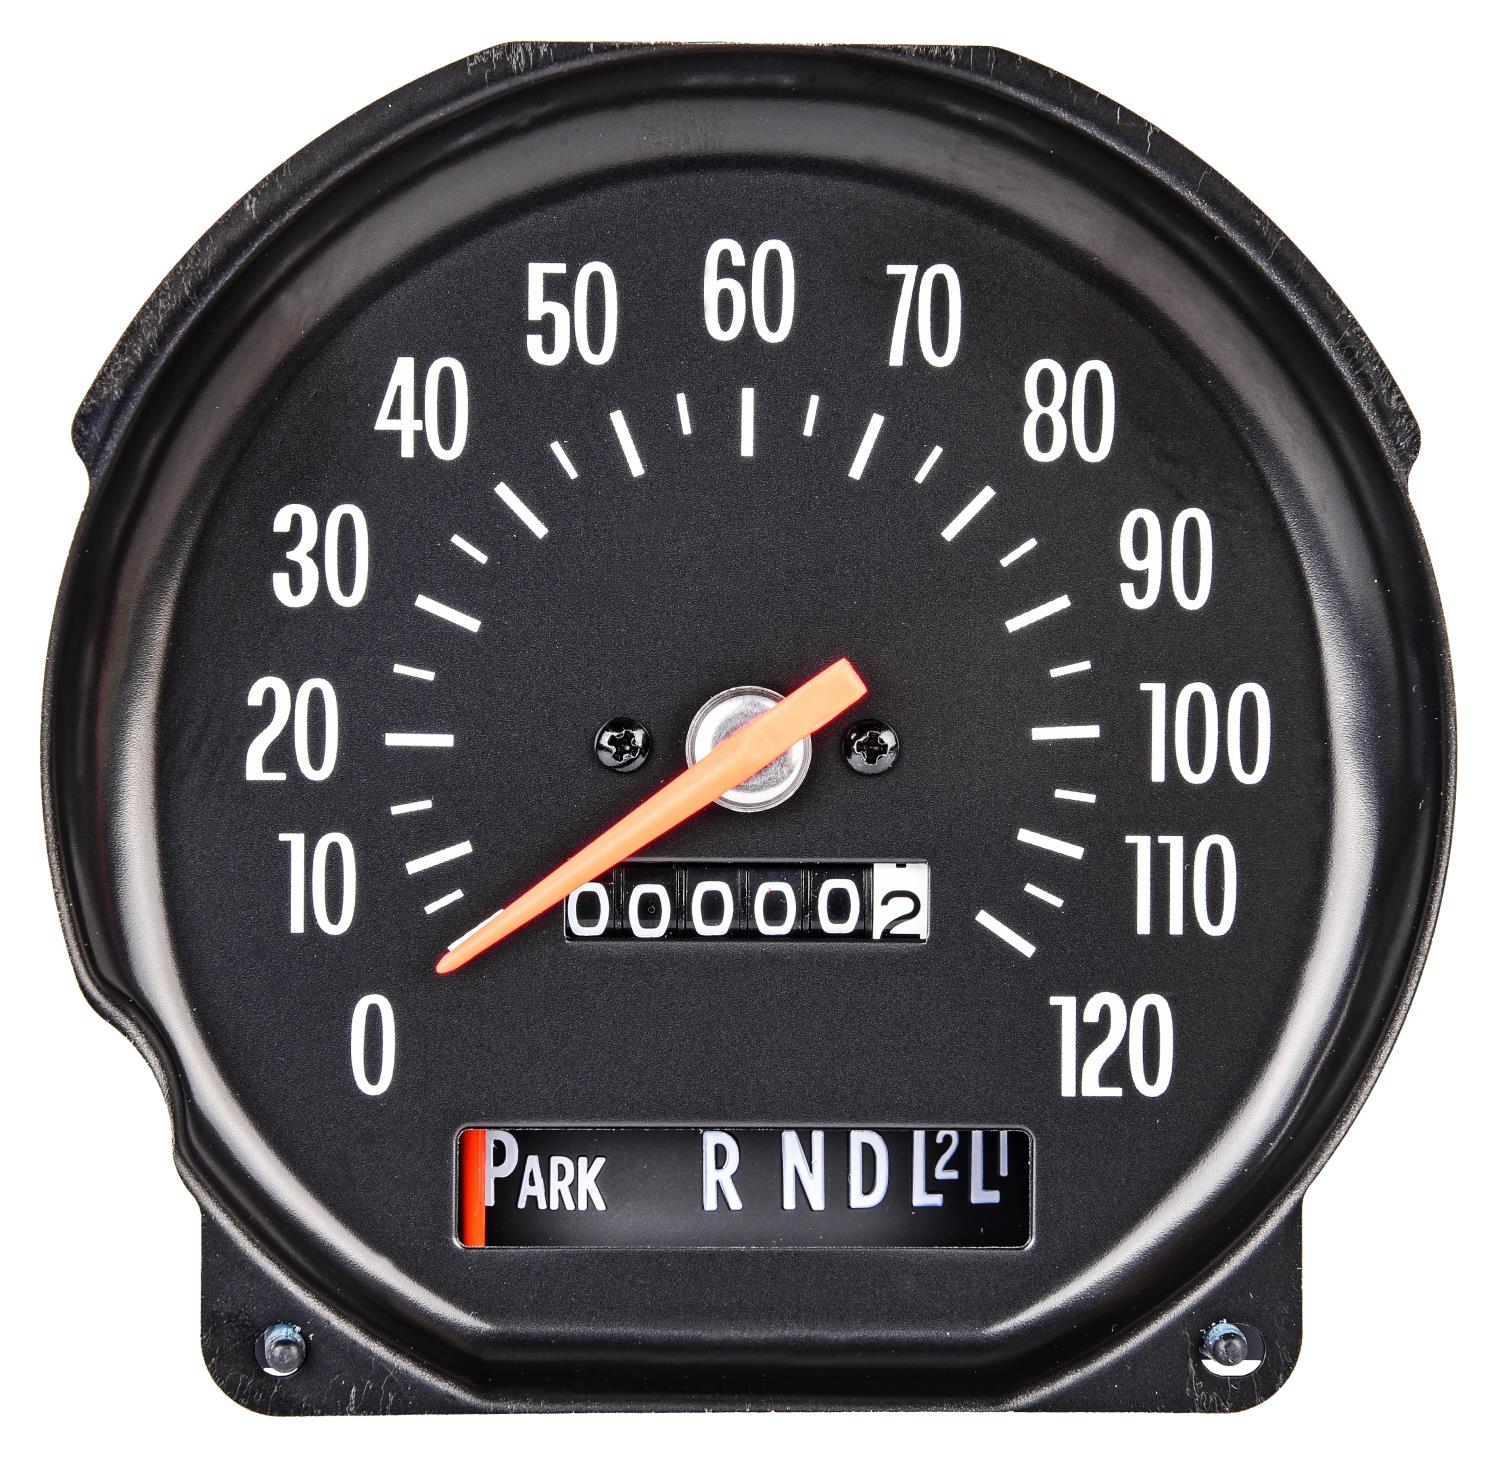 Factory Style Speedometer for 1971-1972 Chevrolet Chevelle, El Camino and Monte Carlo with SS Dash and Column Shift [0-120 MPH]